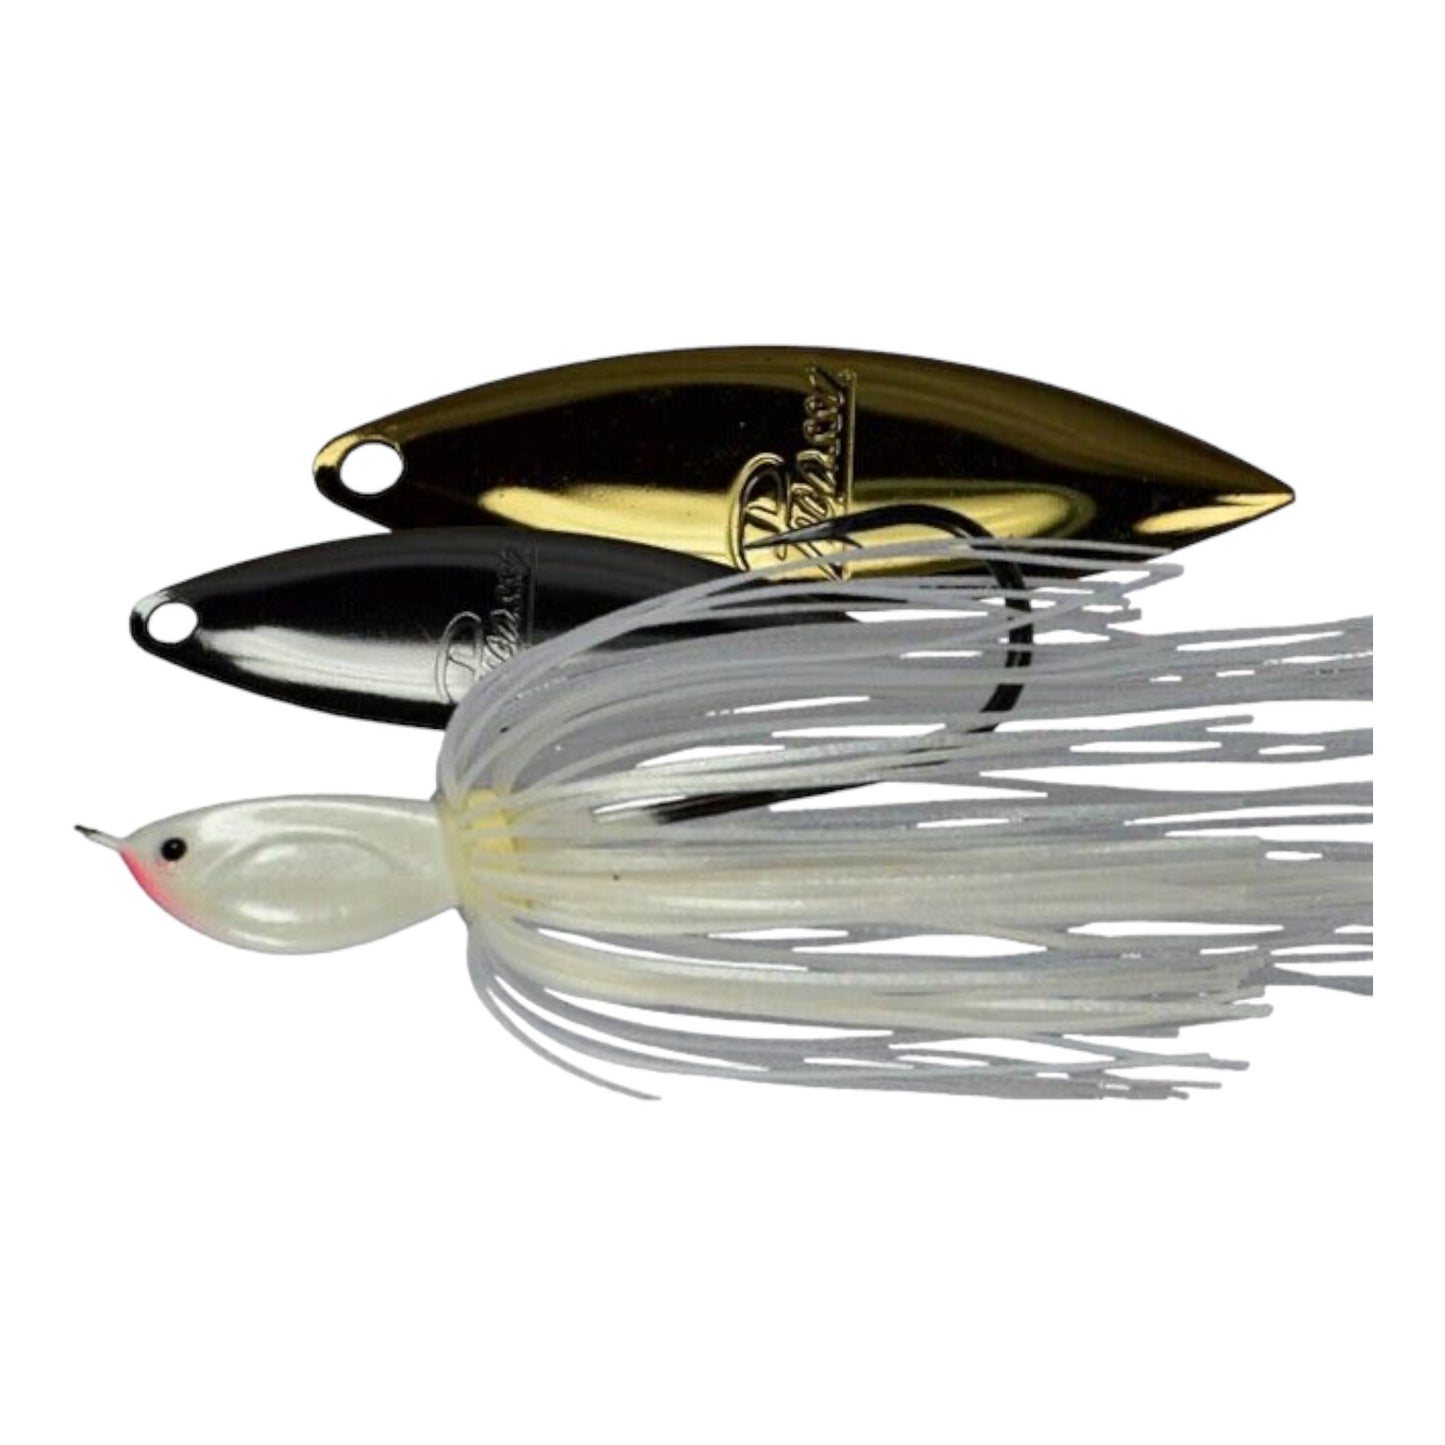 Picasso Lures Invizwire Super Strong DBL Willow Spinnerbait